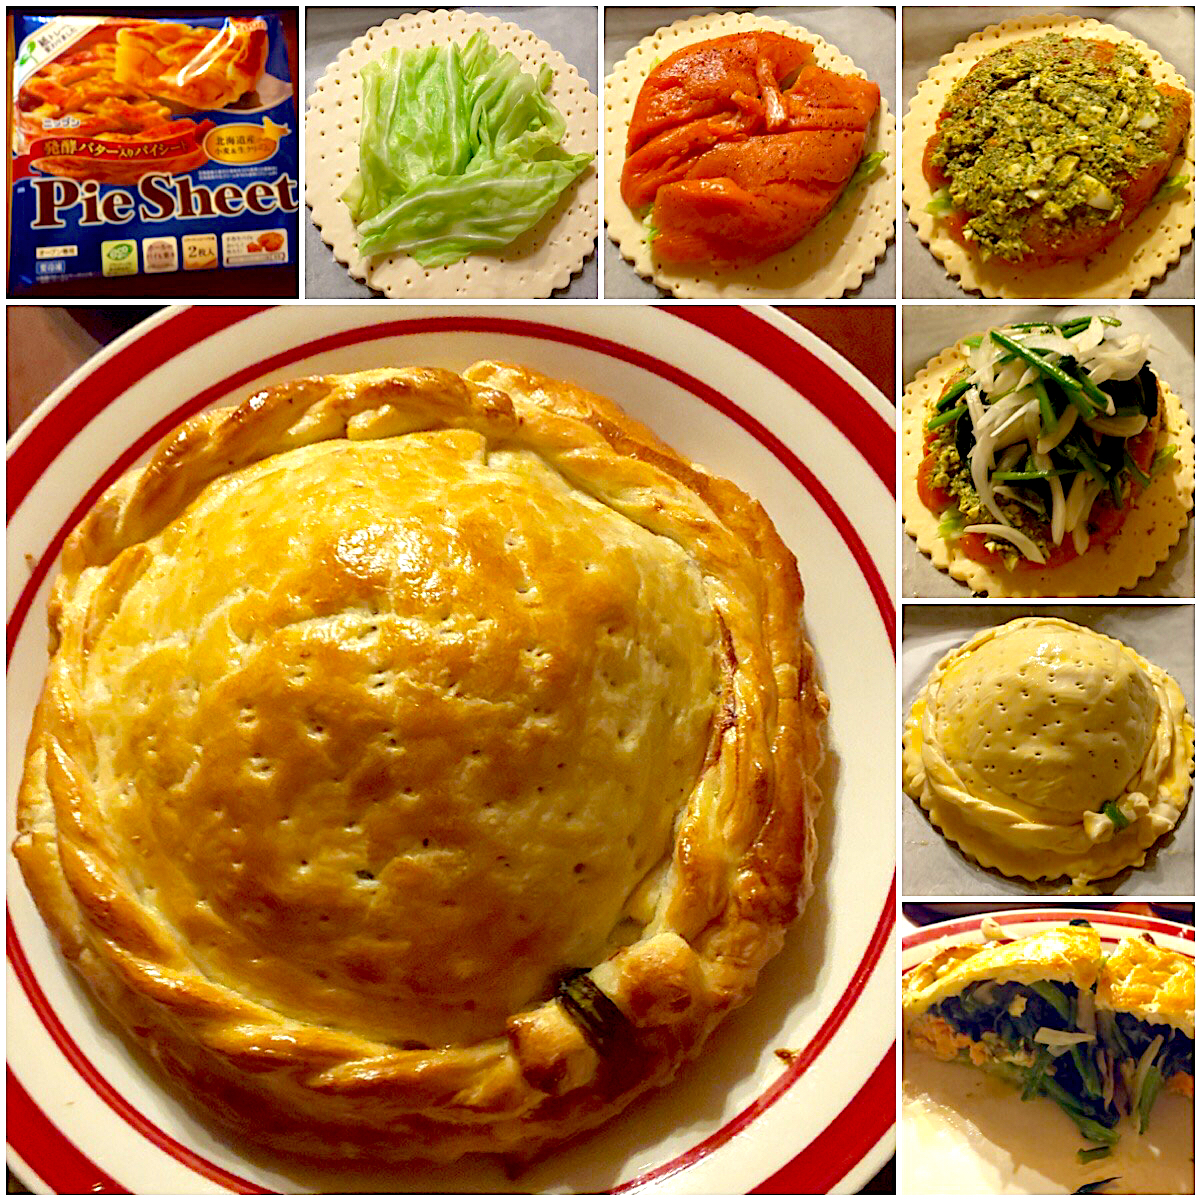 Кулебяка🐟ｸﾚﾋﾞｬｰｶ Russian style salmon&Vegetables julienne pie🐟ﾛｼｱ風ｻｰﾓﾝのﾊﾟｲ包み